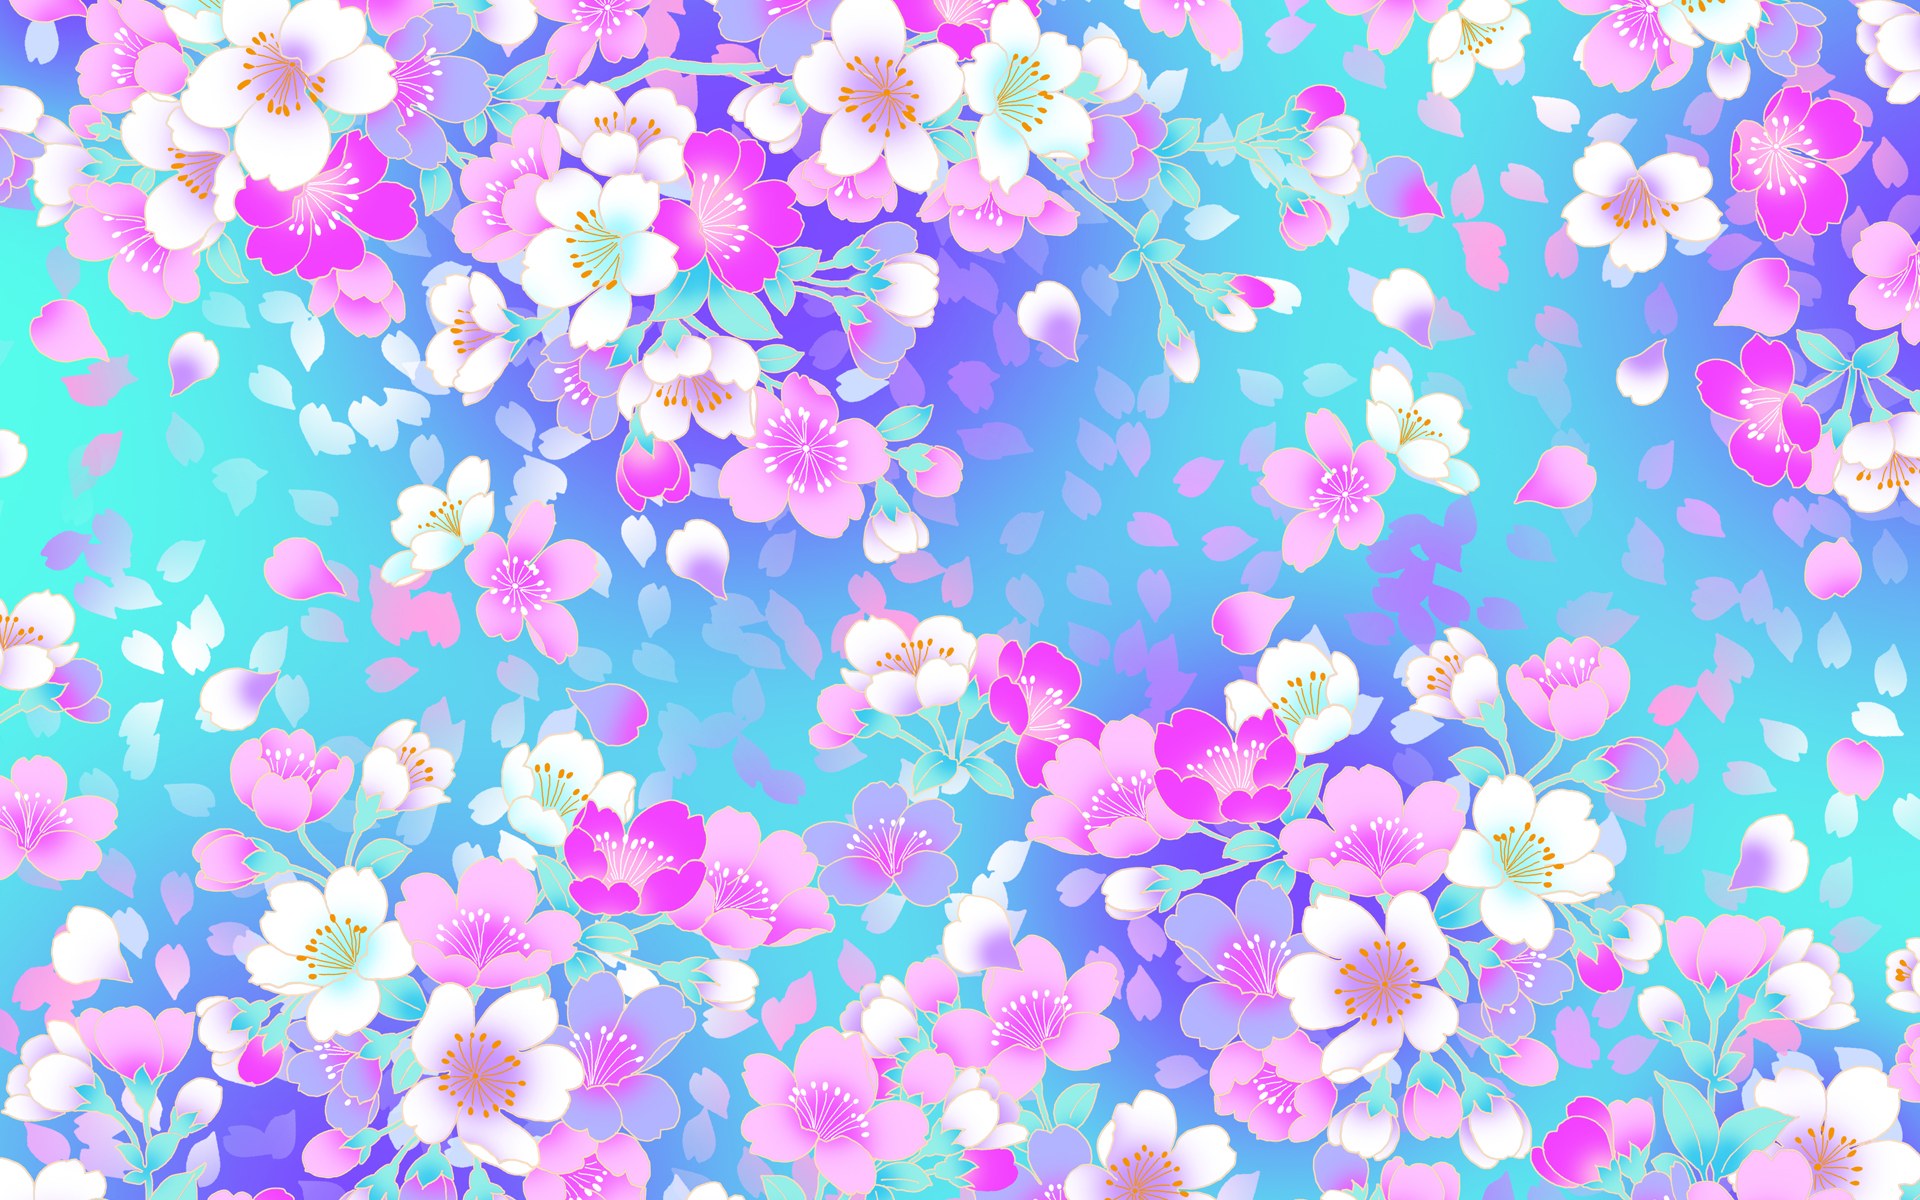 Girly wallpapers